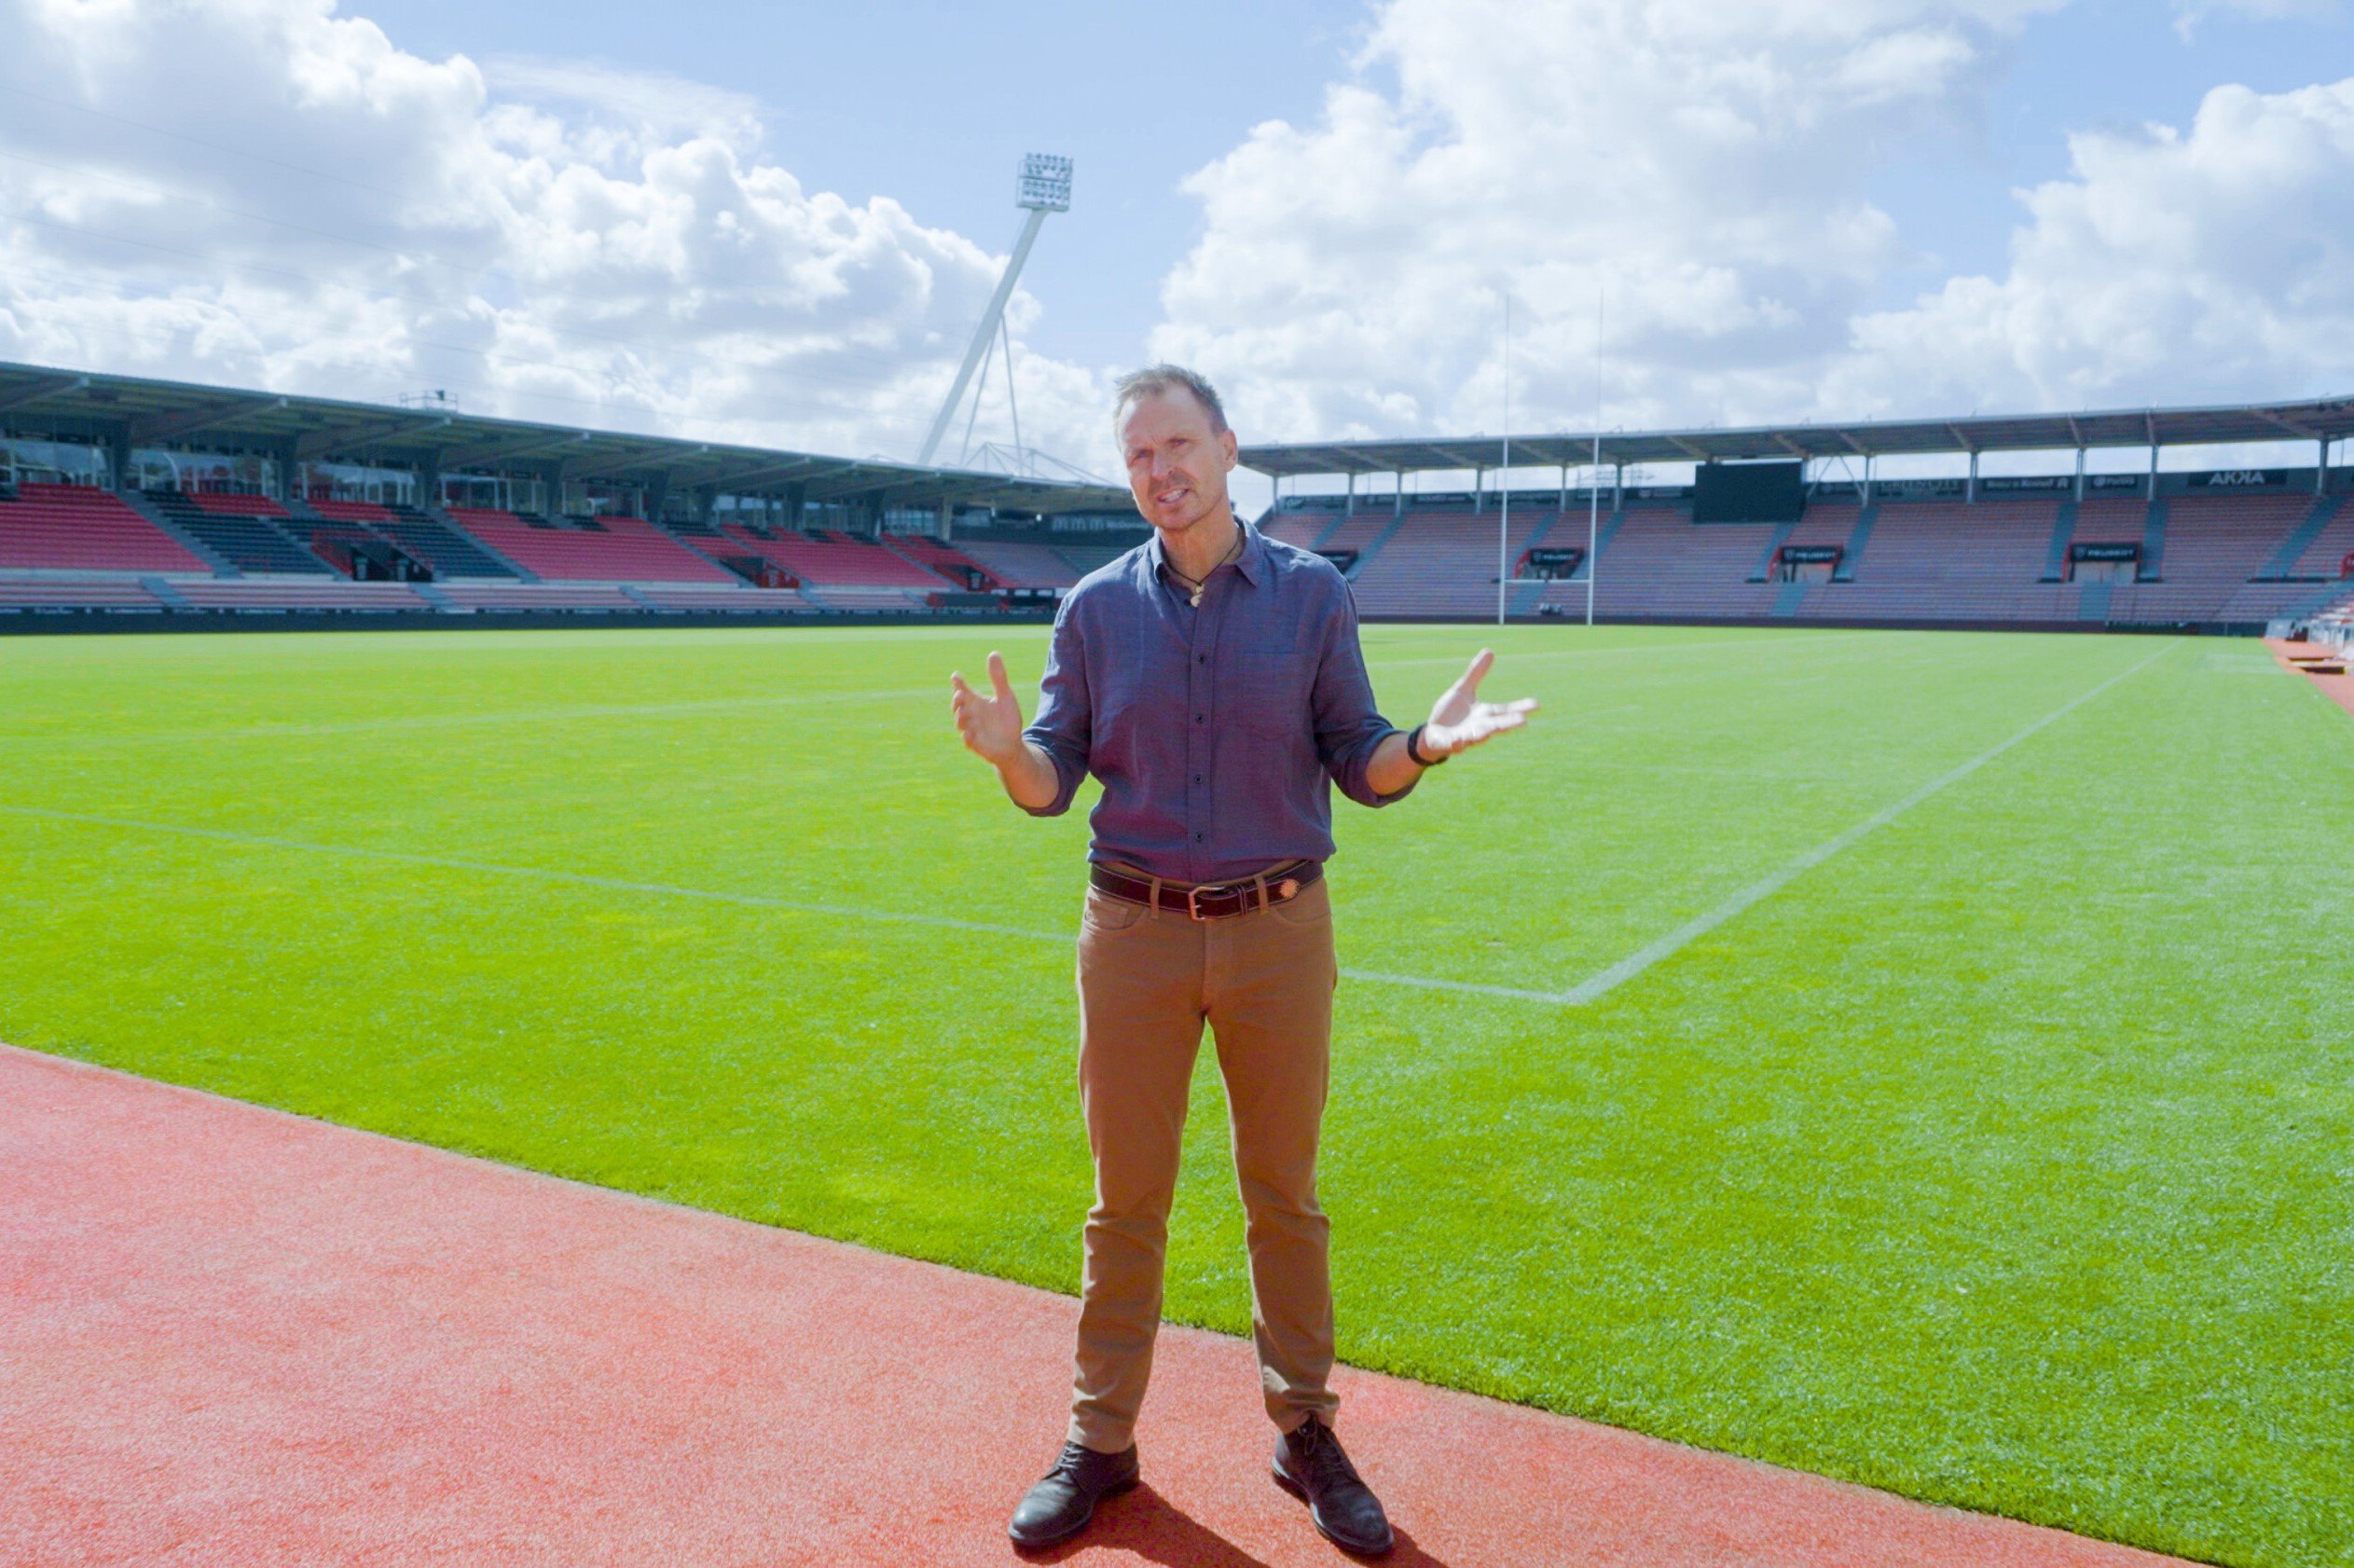 Phil Keoghan, who people can watch host 'The Amazing Race' Season 34 on CBS, stands on a sports field wearing a blue button-down shirt and tan pants.